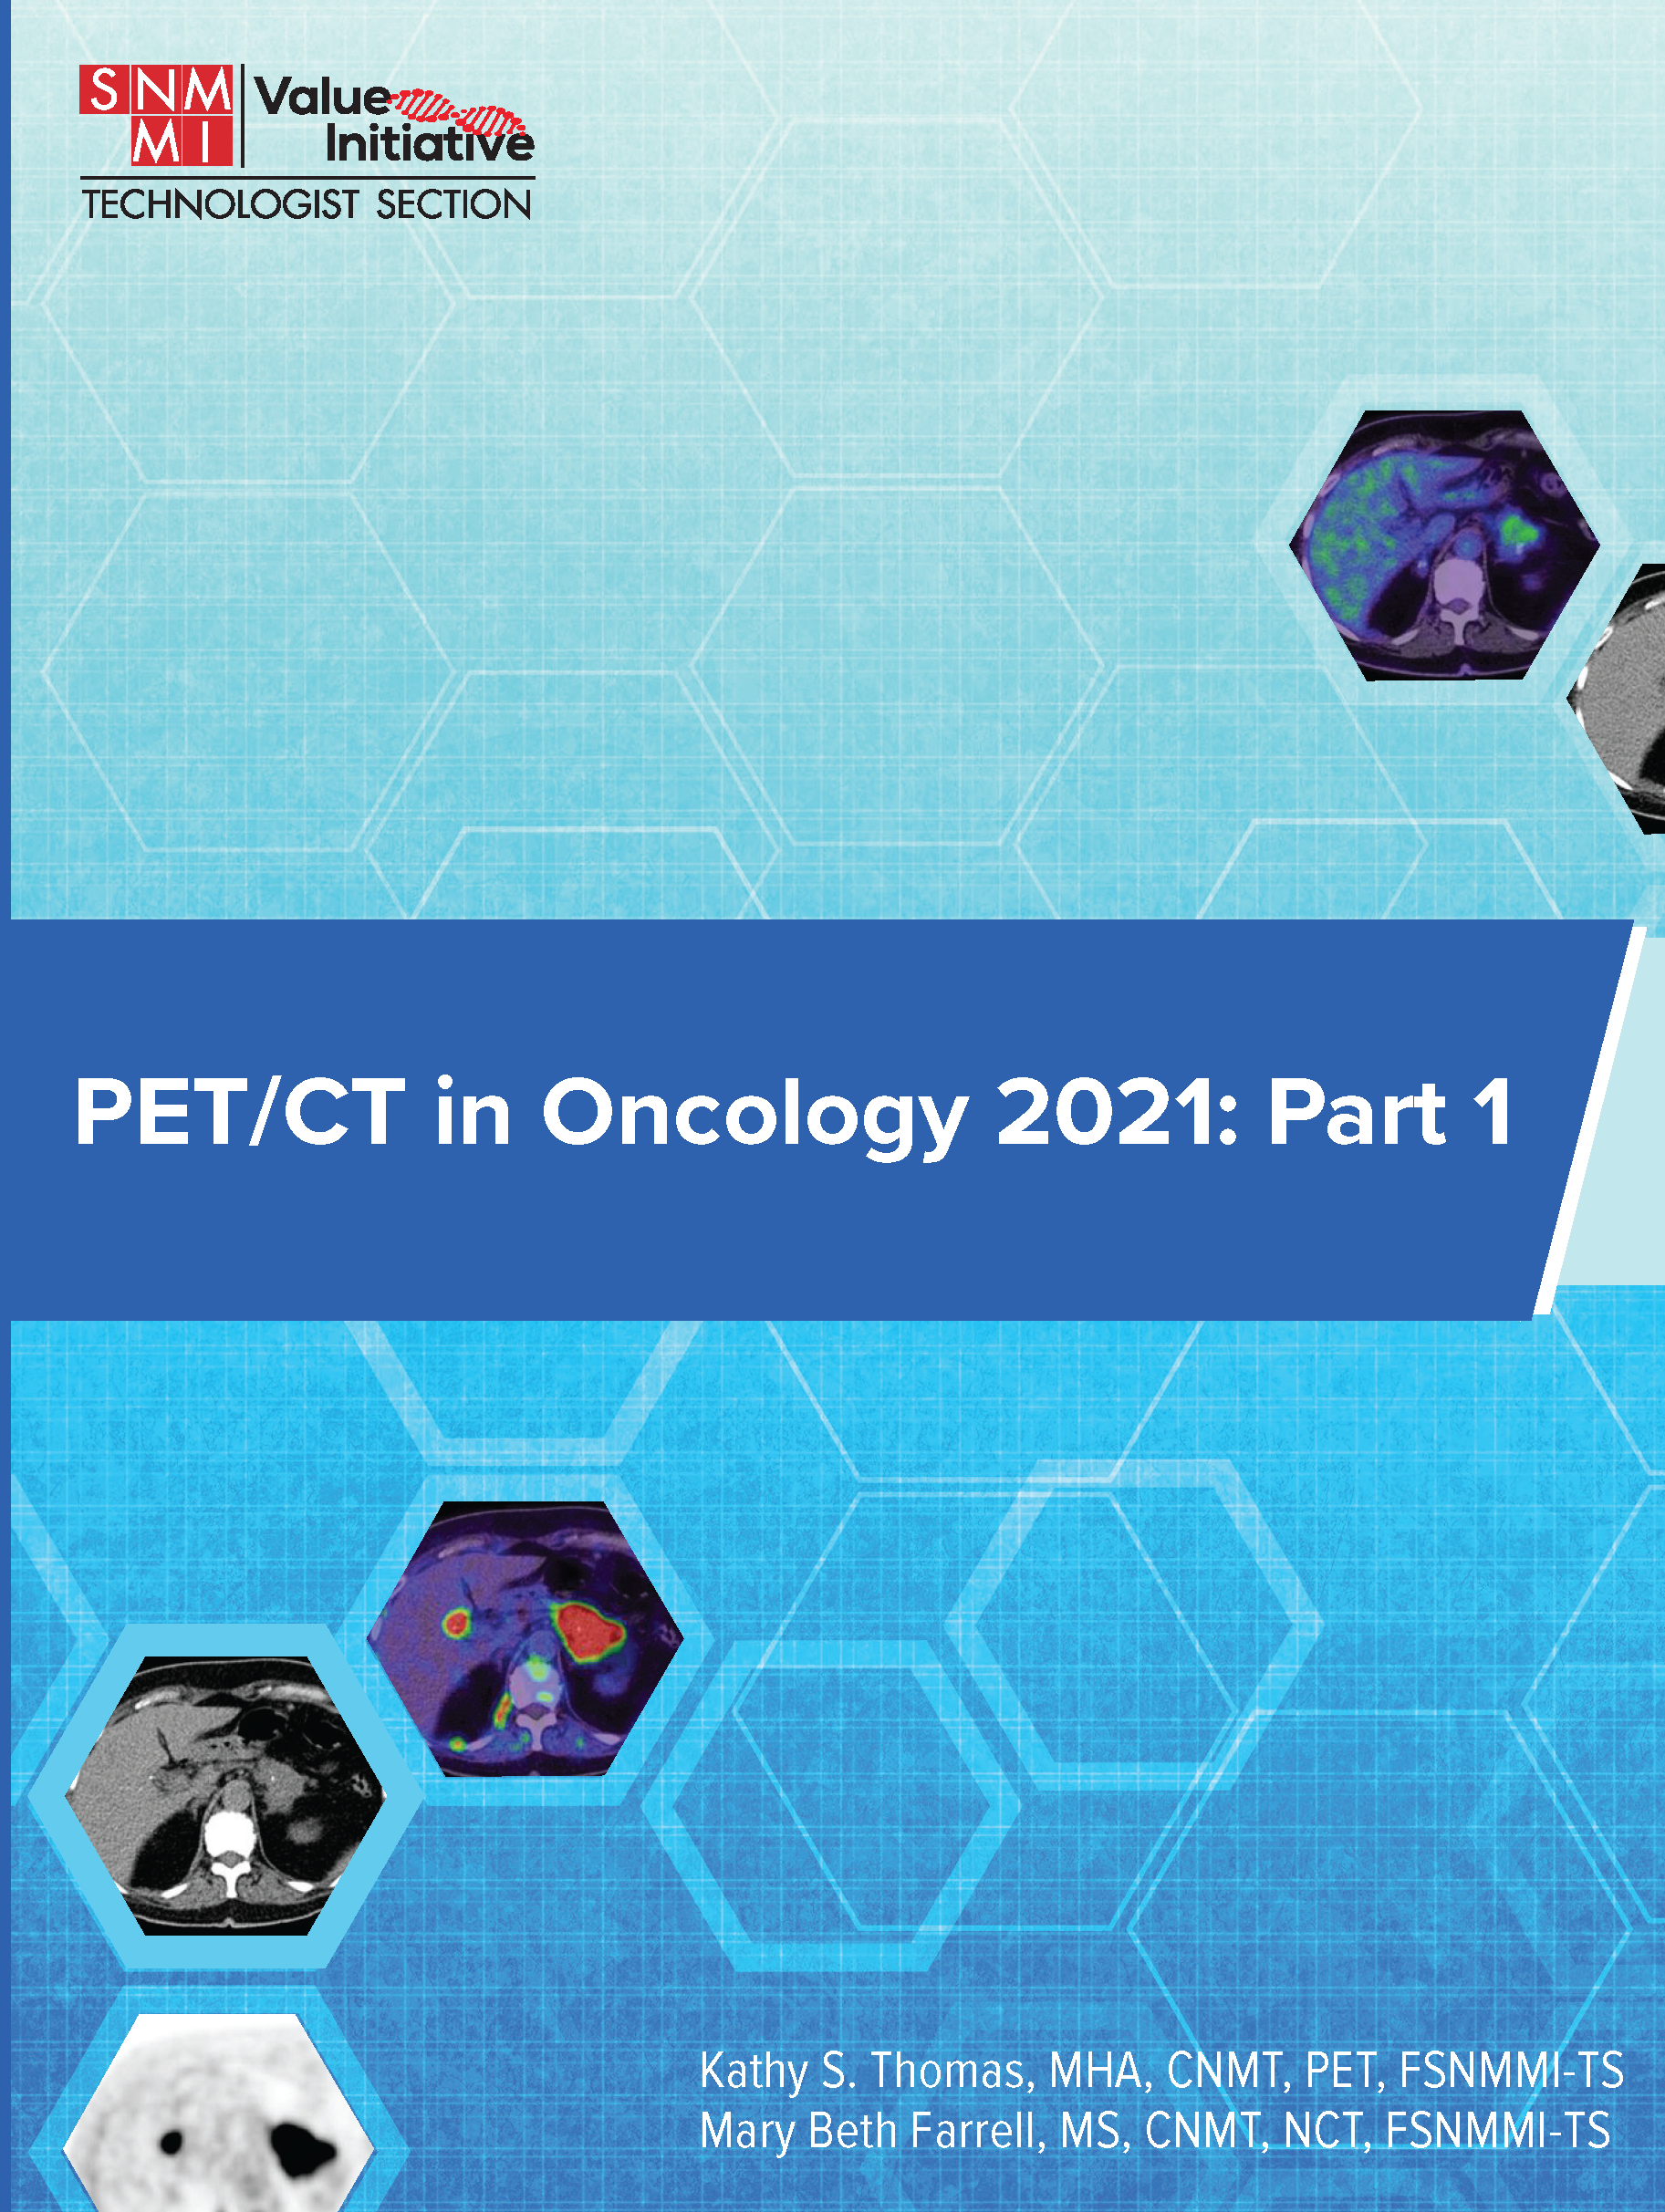 PET/CT in Oncology 2021, Part 1